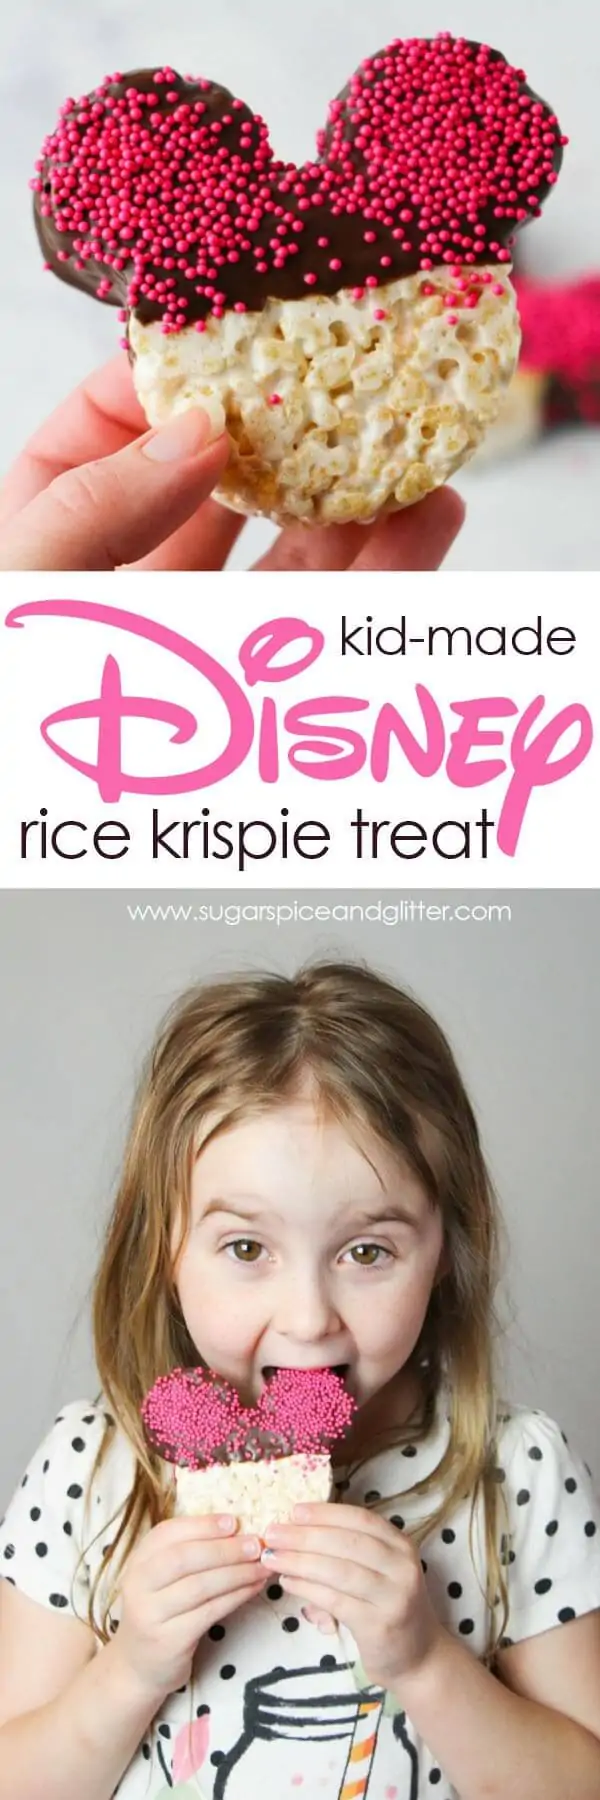 An easy Disney dessert kids can make to have a bit of the parks at home, these Mickey-shaped Rice Krispie treats are a classic treat that's allergy-safe for lunch boxes or playdates